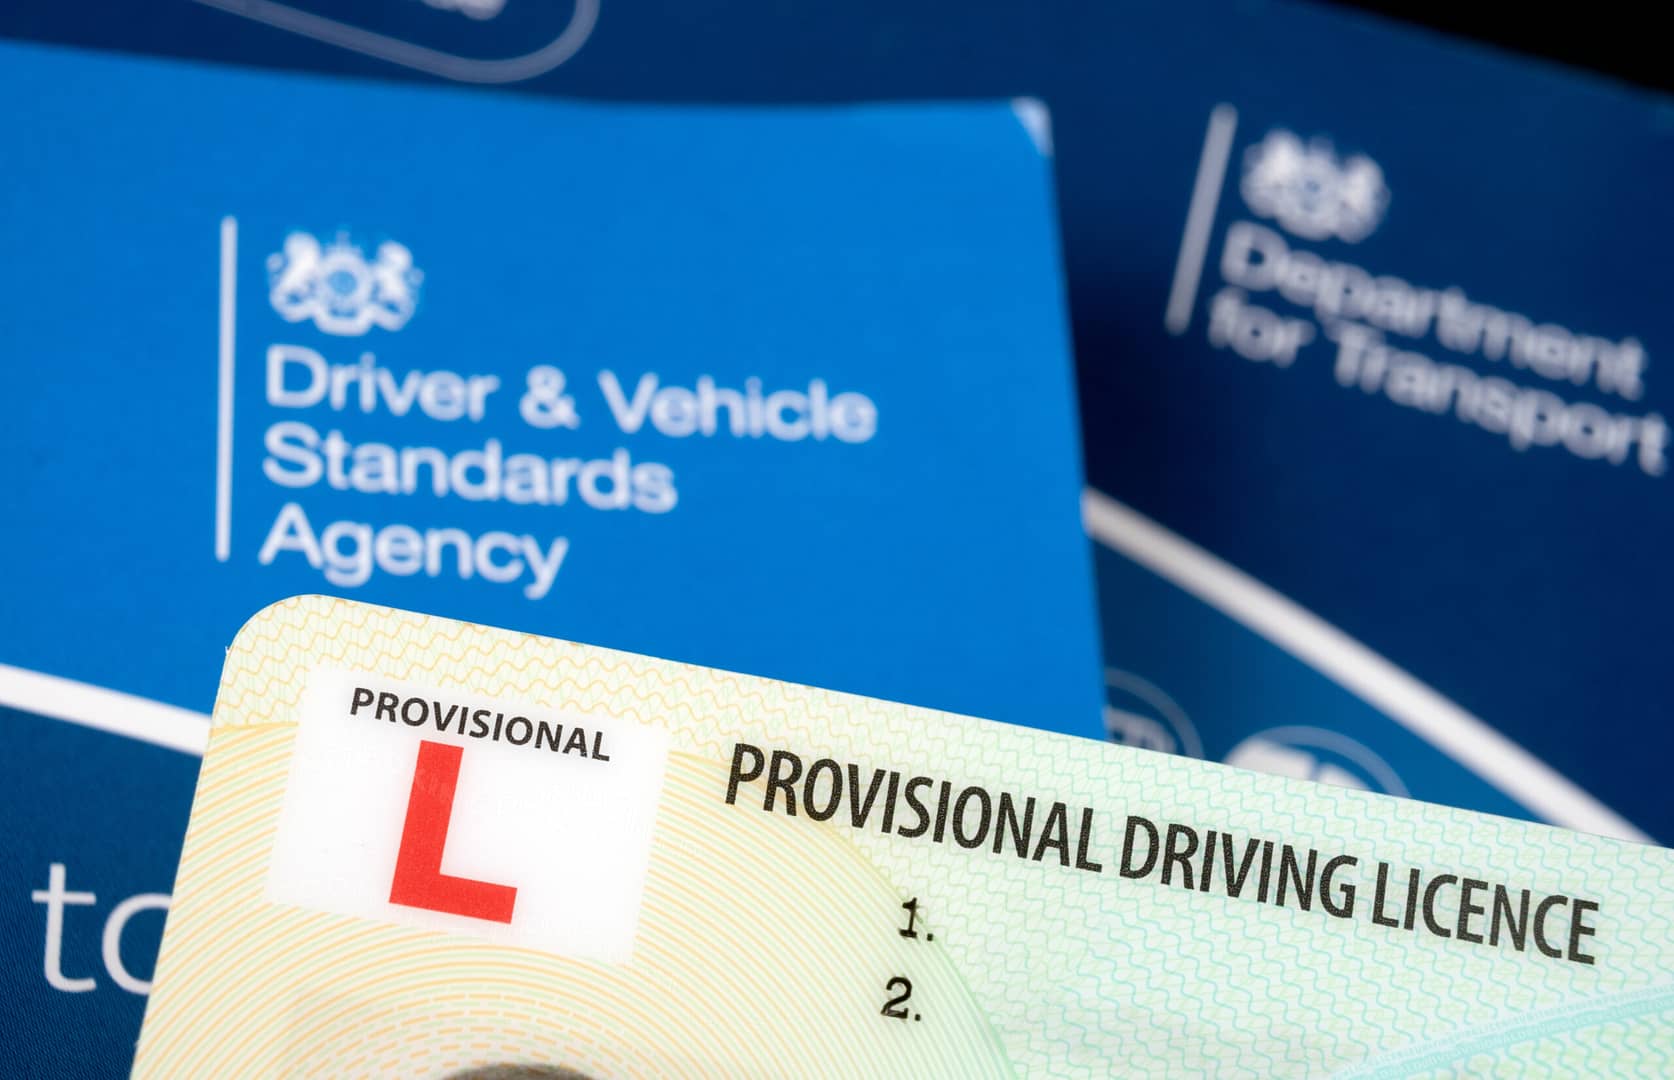 Provisional license Driving card. Document for Learner's permit drivers.